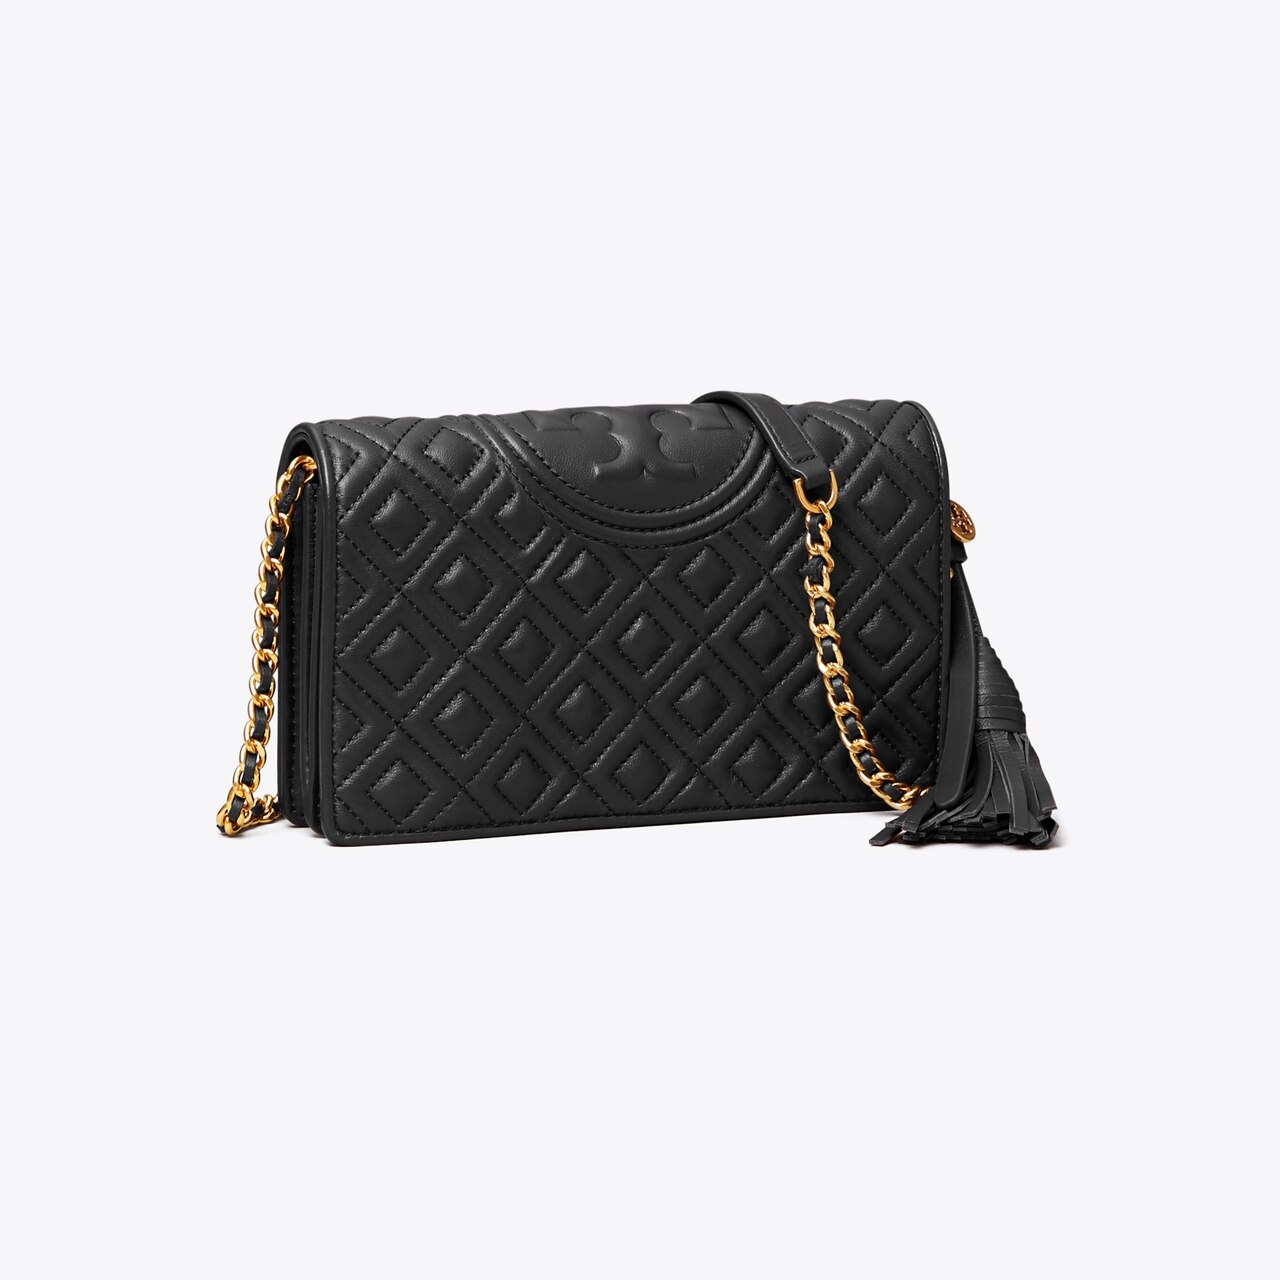 Shop With Us Readers Love This Tory Burch Cross-Body Bag